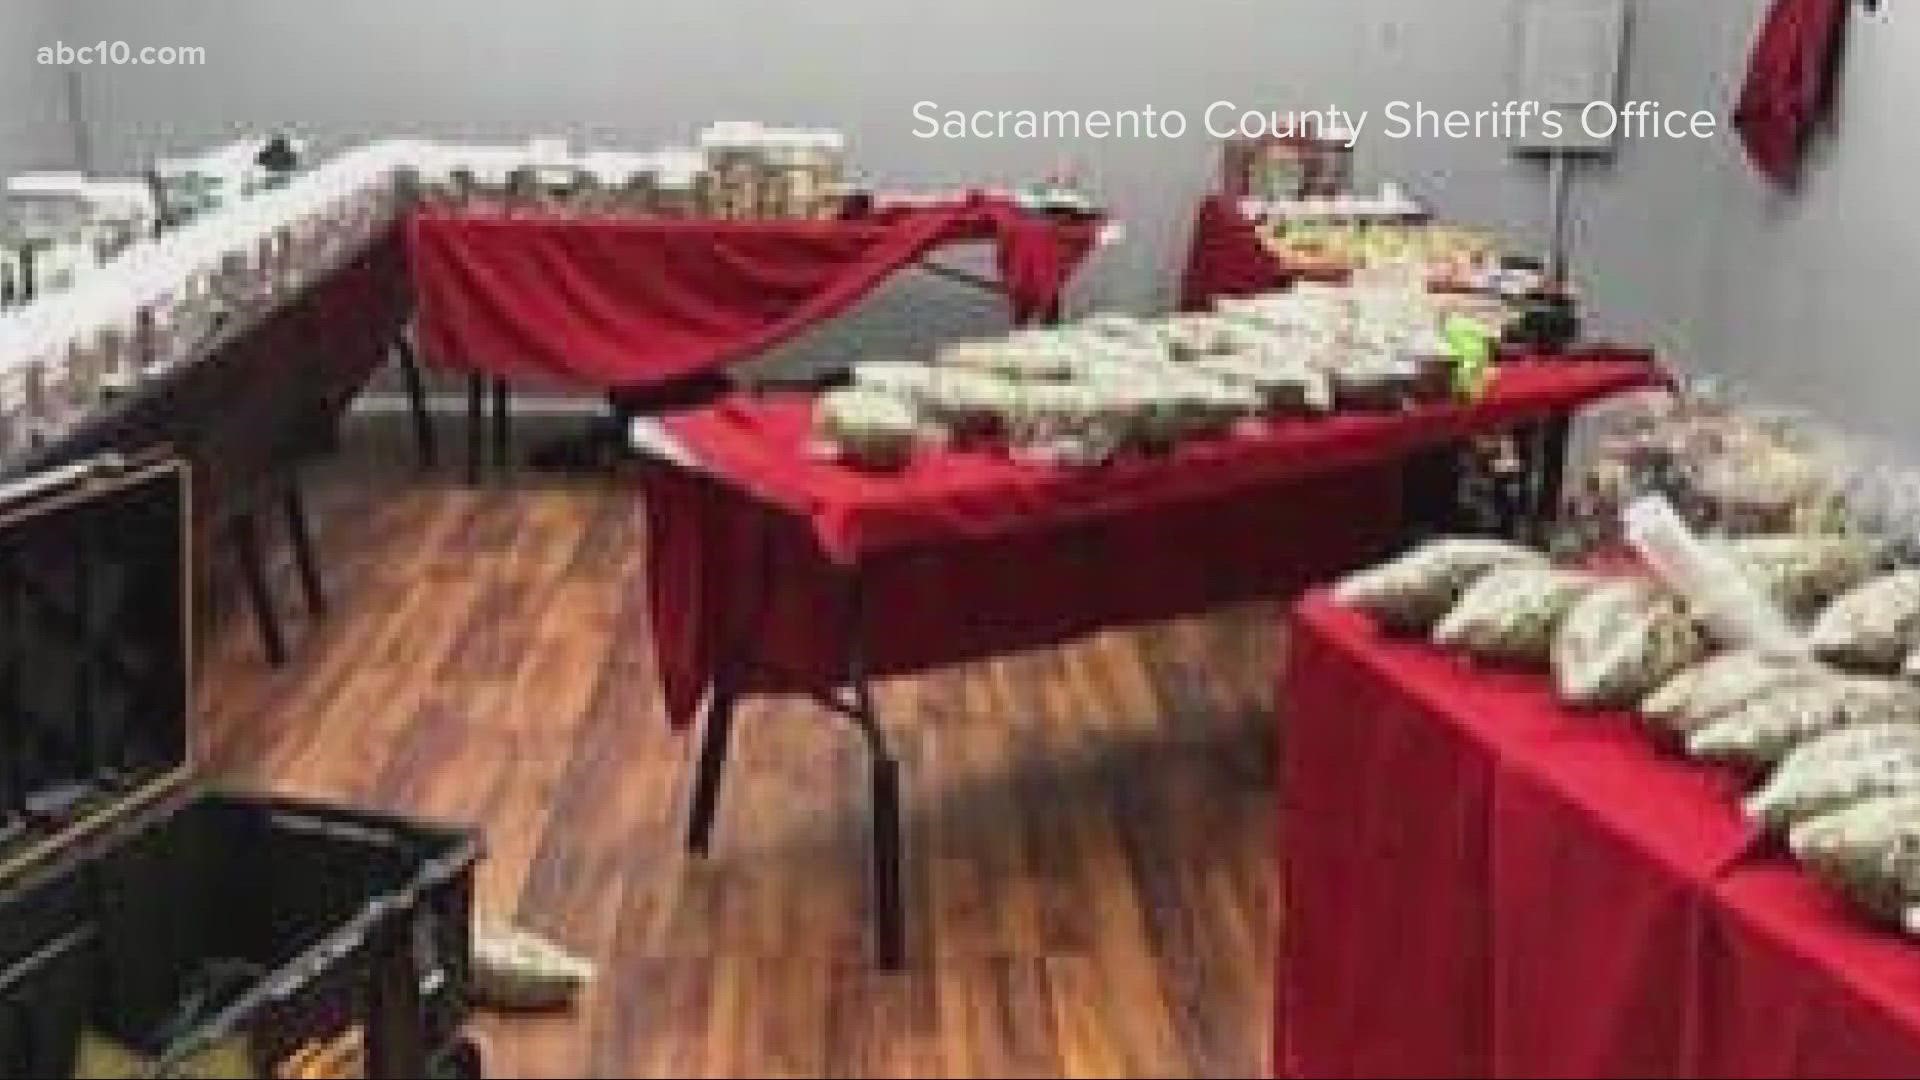 Multiple guns, drugs and cash were seized at an illegal dispensary in North Sacramento. City Council funds security improvements in Old Sacramento.